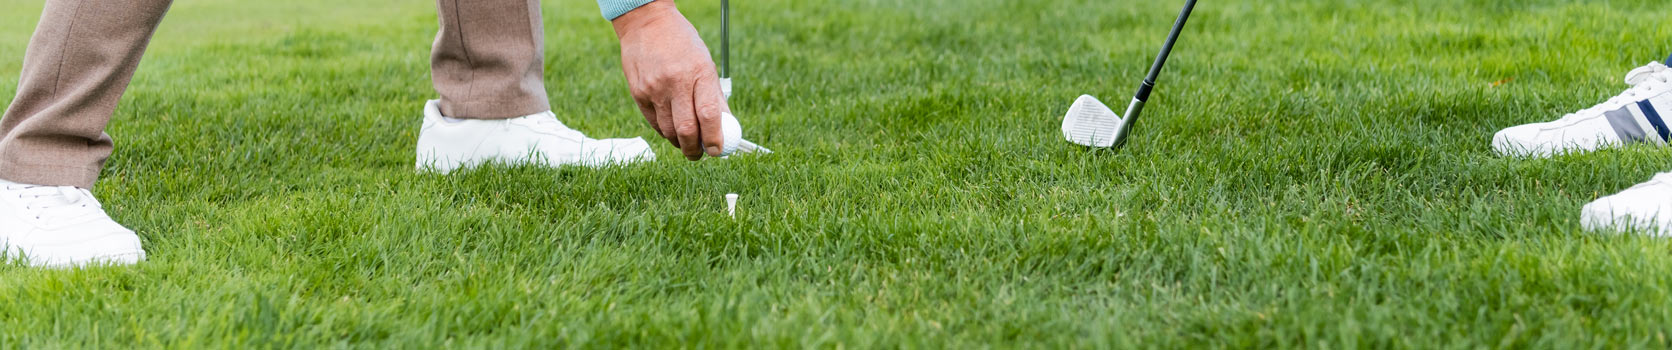 golfers using personalized golf tees from Par Golf Supply on the golf course